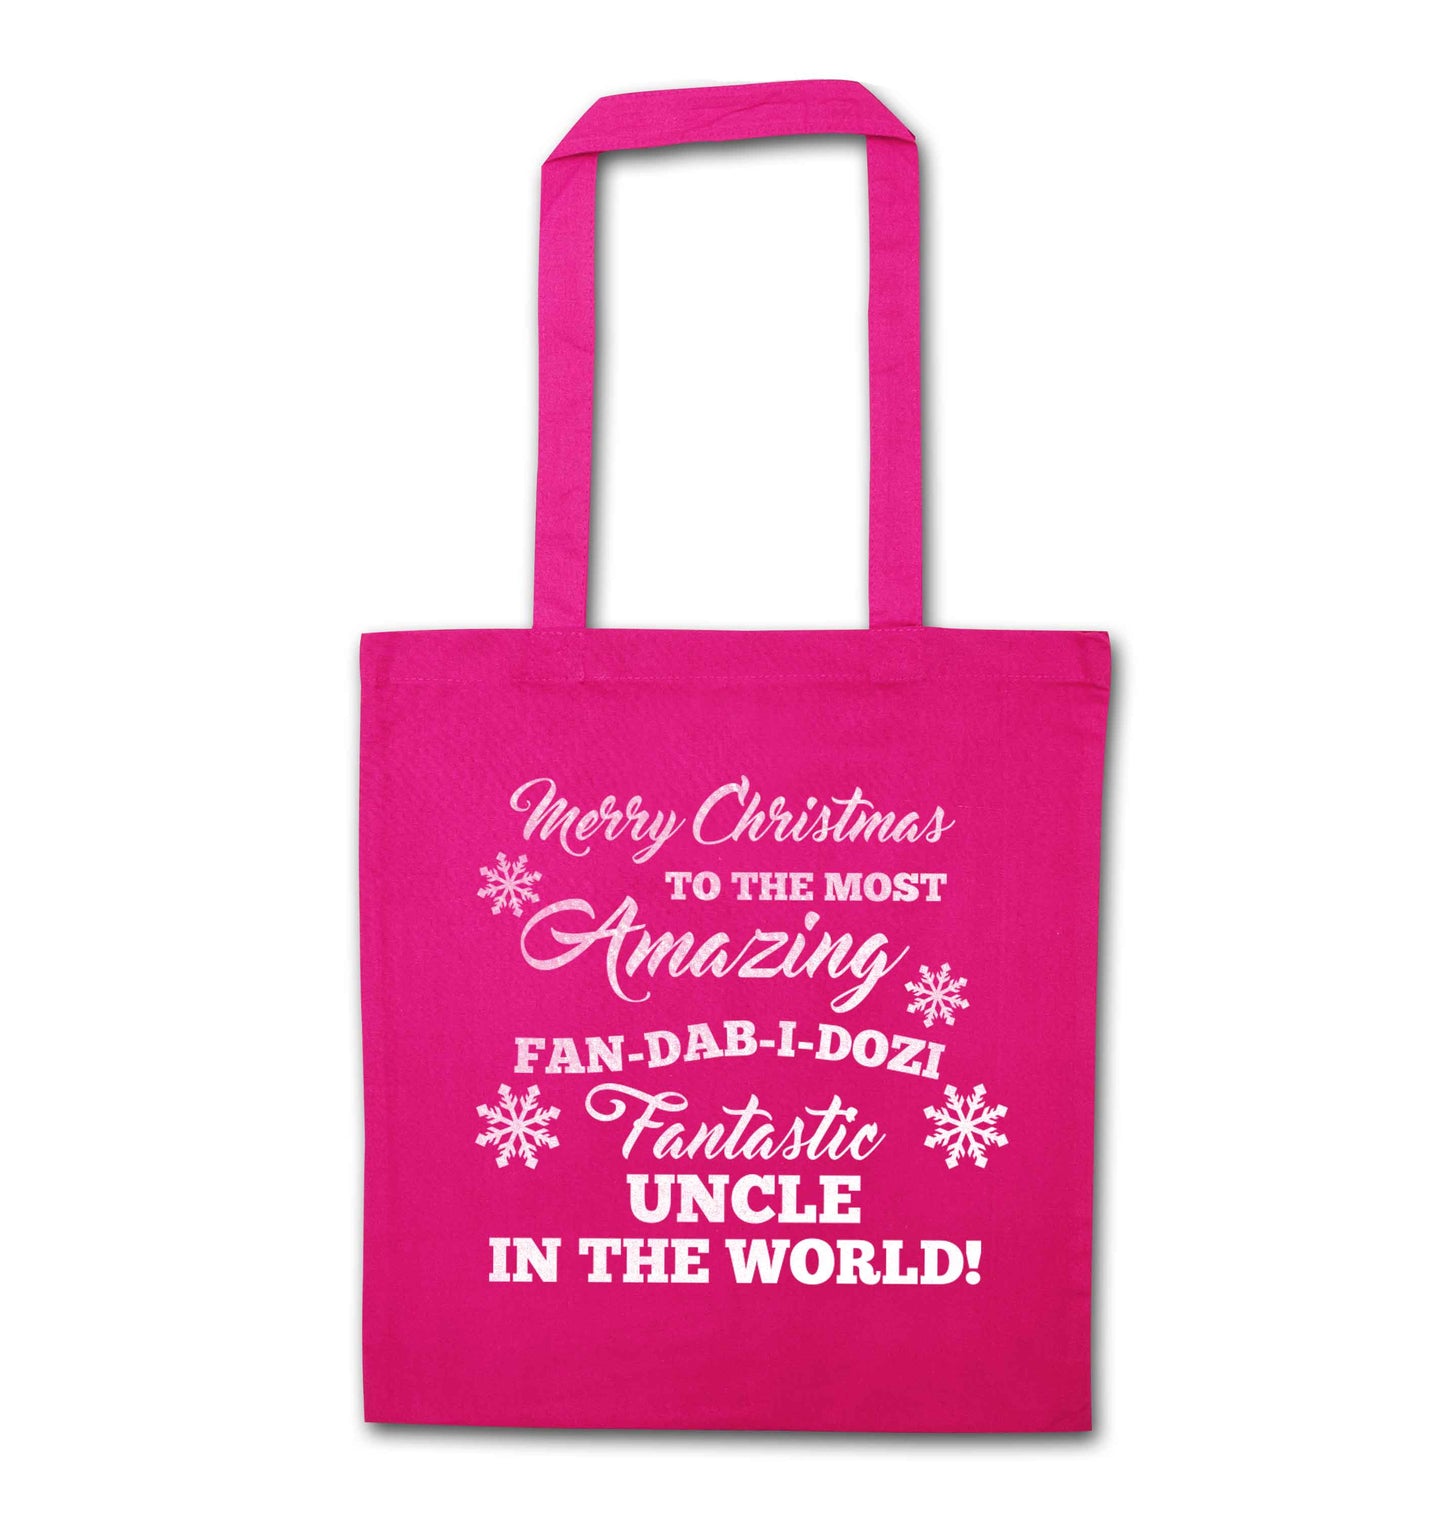 Merry Christmas to the most amazing fan-dab-i-dozi fantasic Uncle in the world pink tote bag